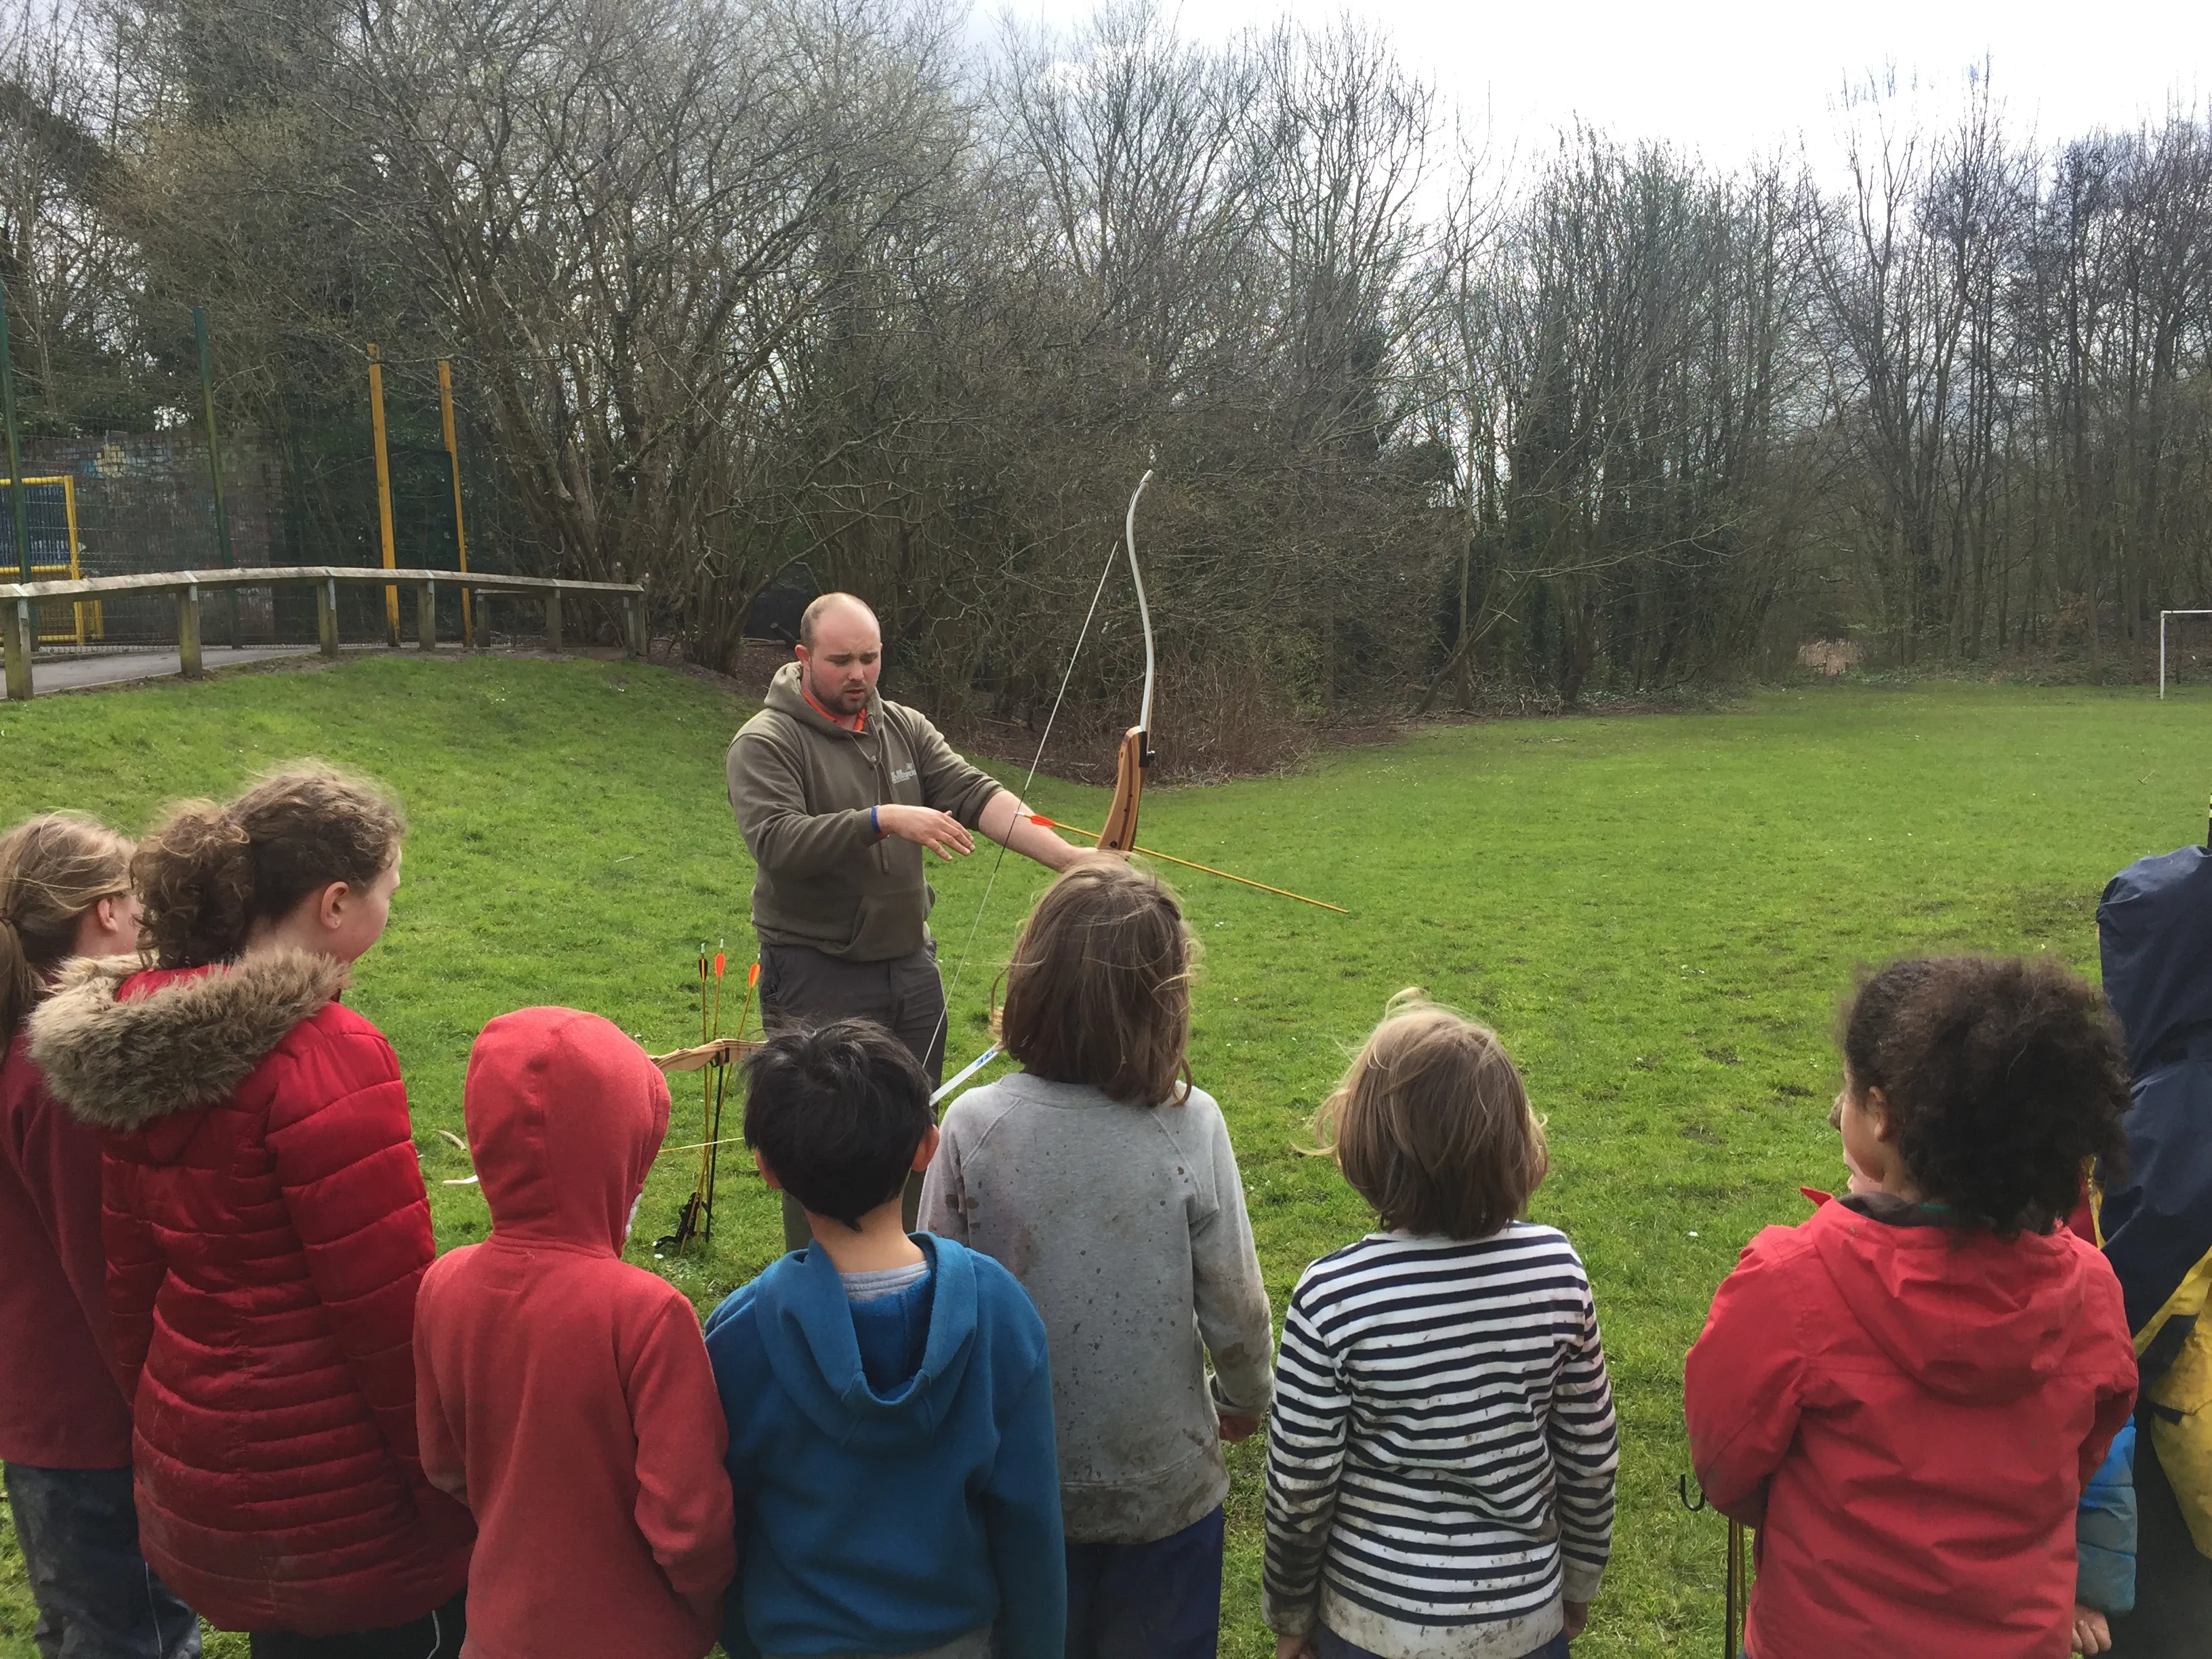 Staff member doing a demonstration of archery.